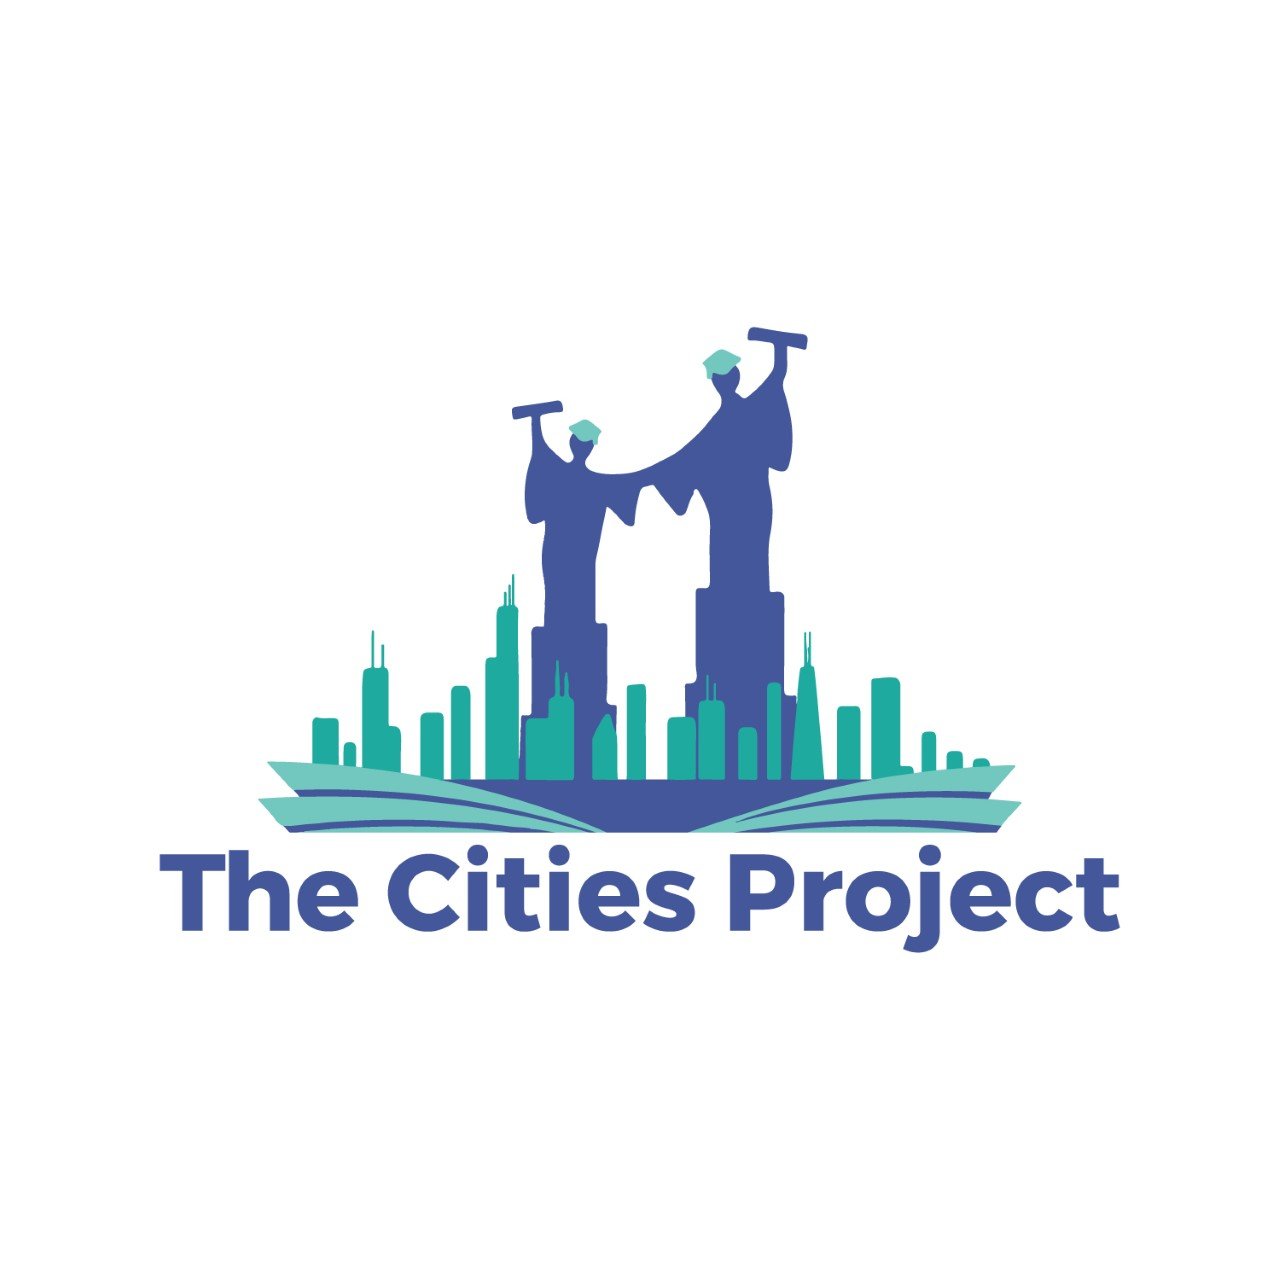 The Cities Project